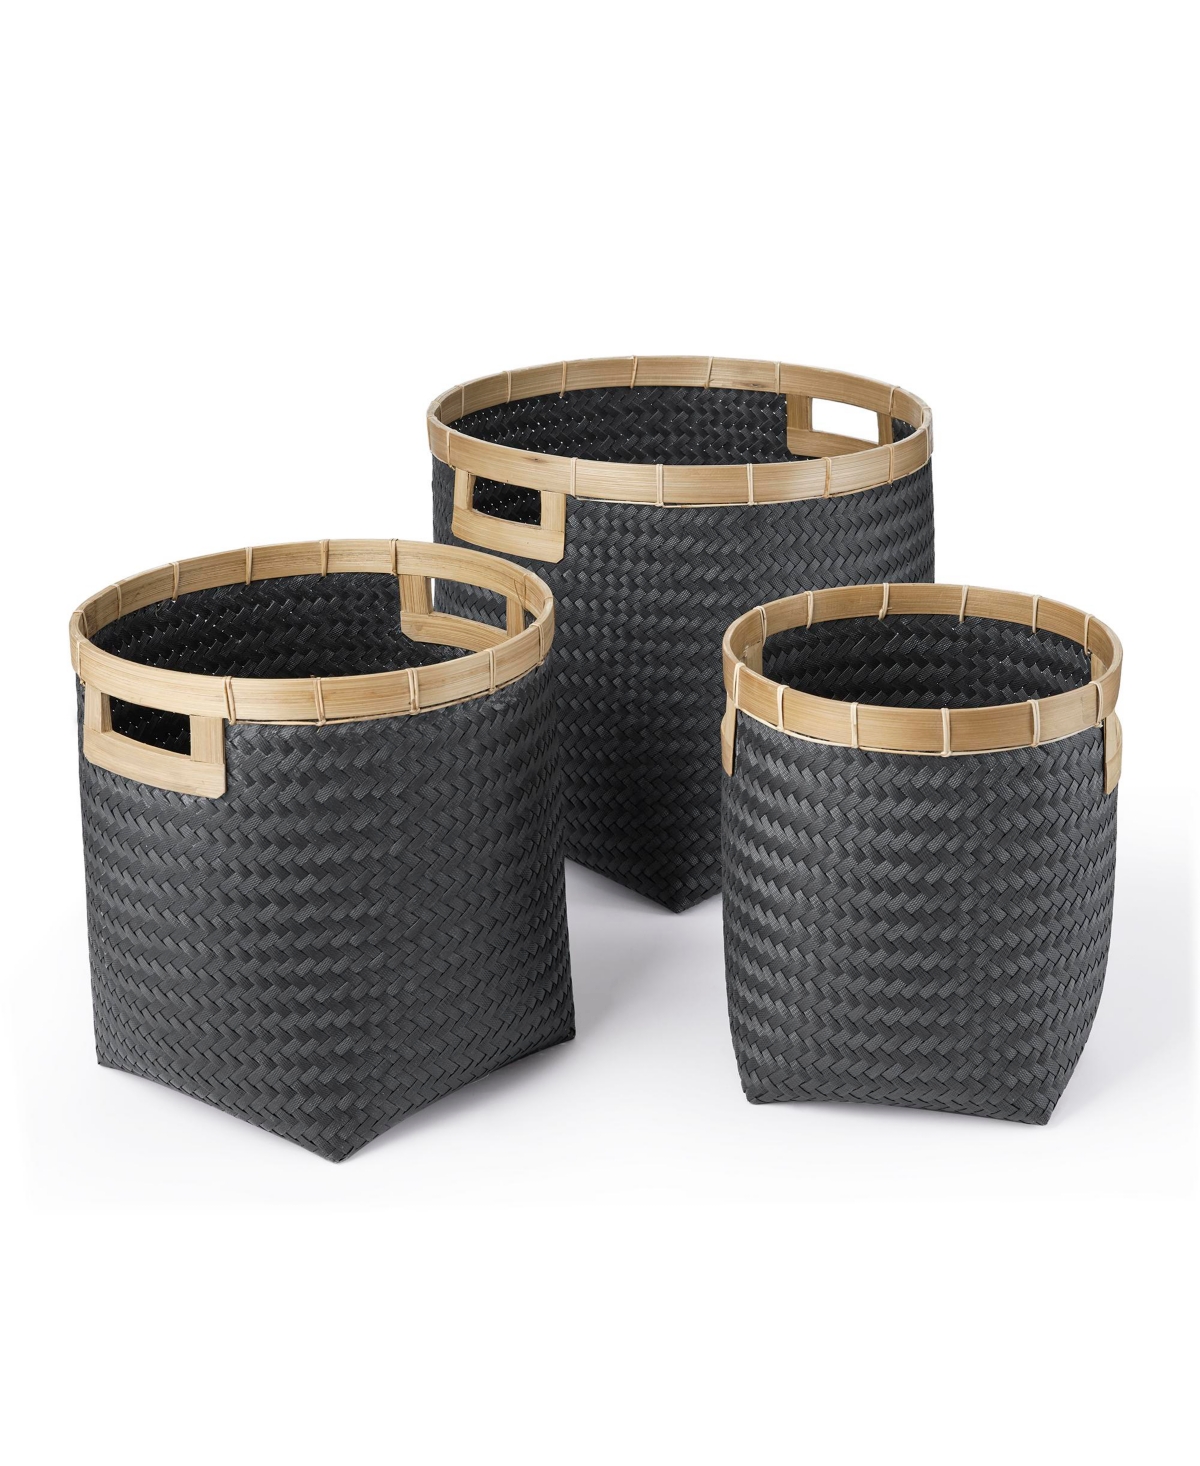 Baum 3 Piece Round Top And Square Bottom Bamboo Basket Set With Cut-out Handles, Natural Rim In Black